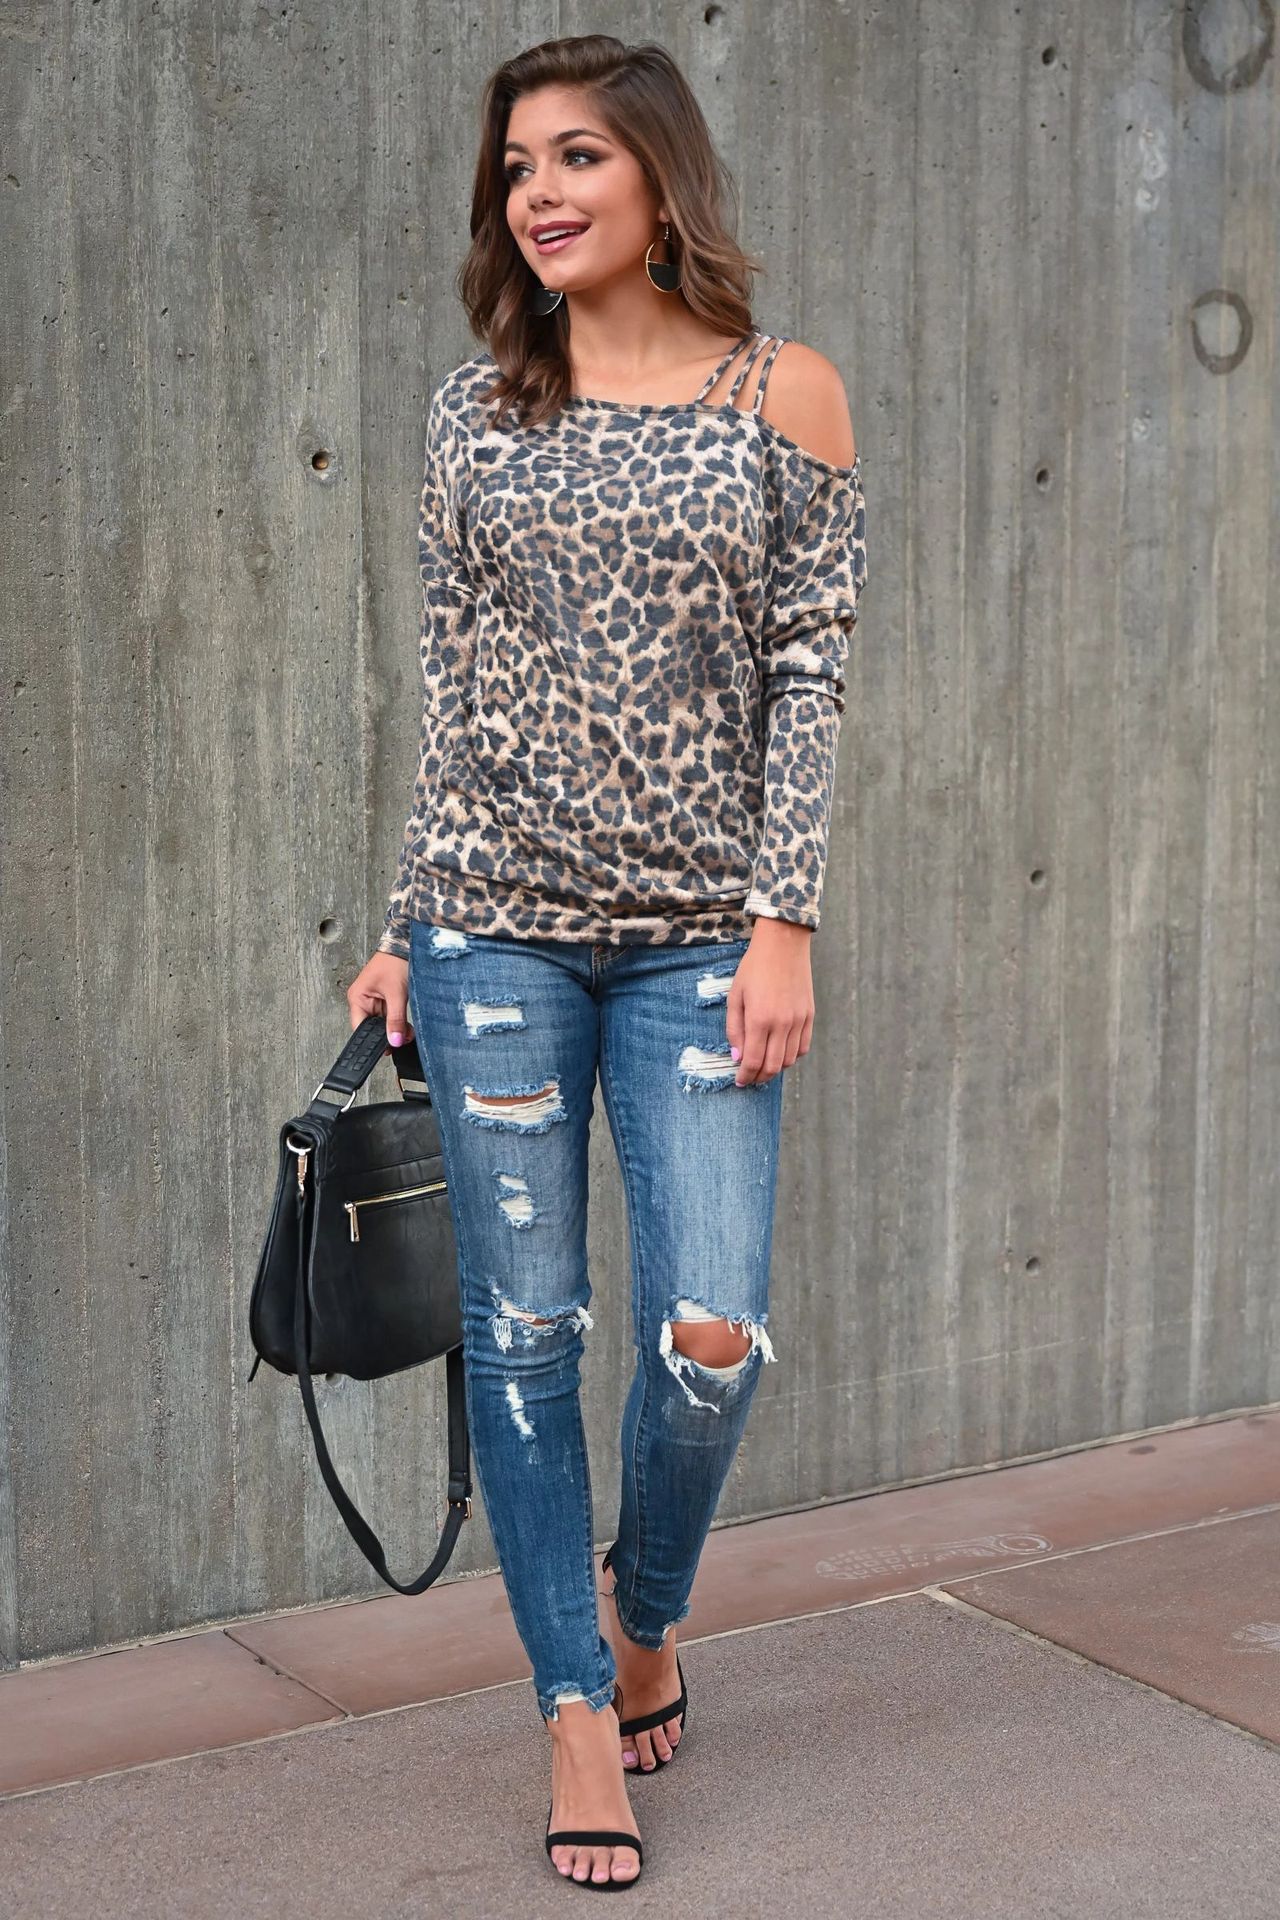 Ladies Leopard Print Strapless Bottoming Shirt Top T-Shirt NSYF1081